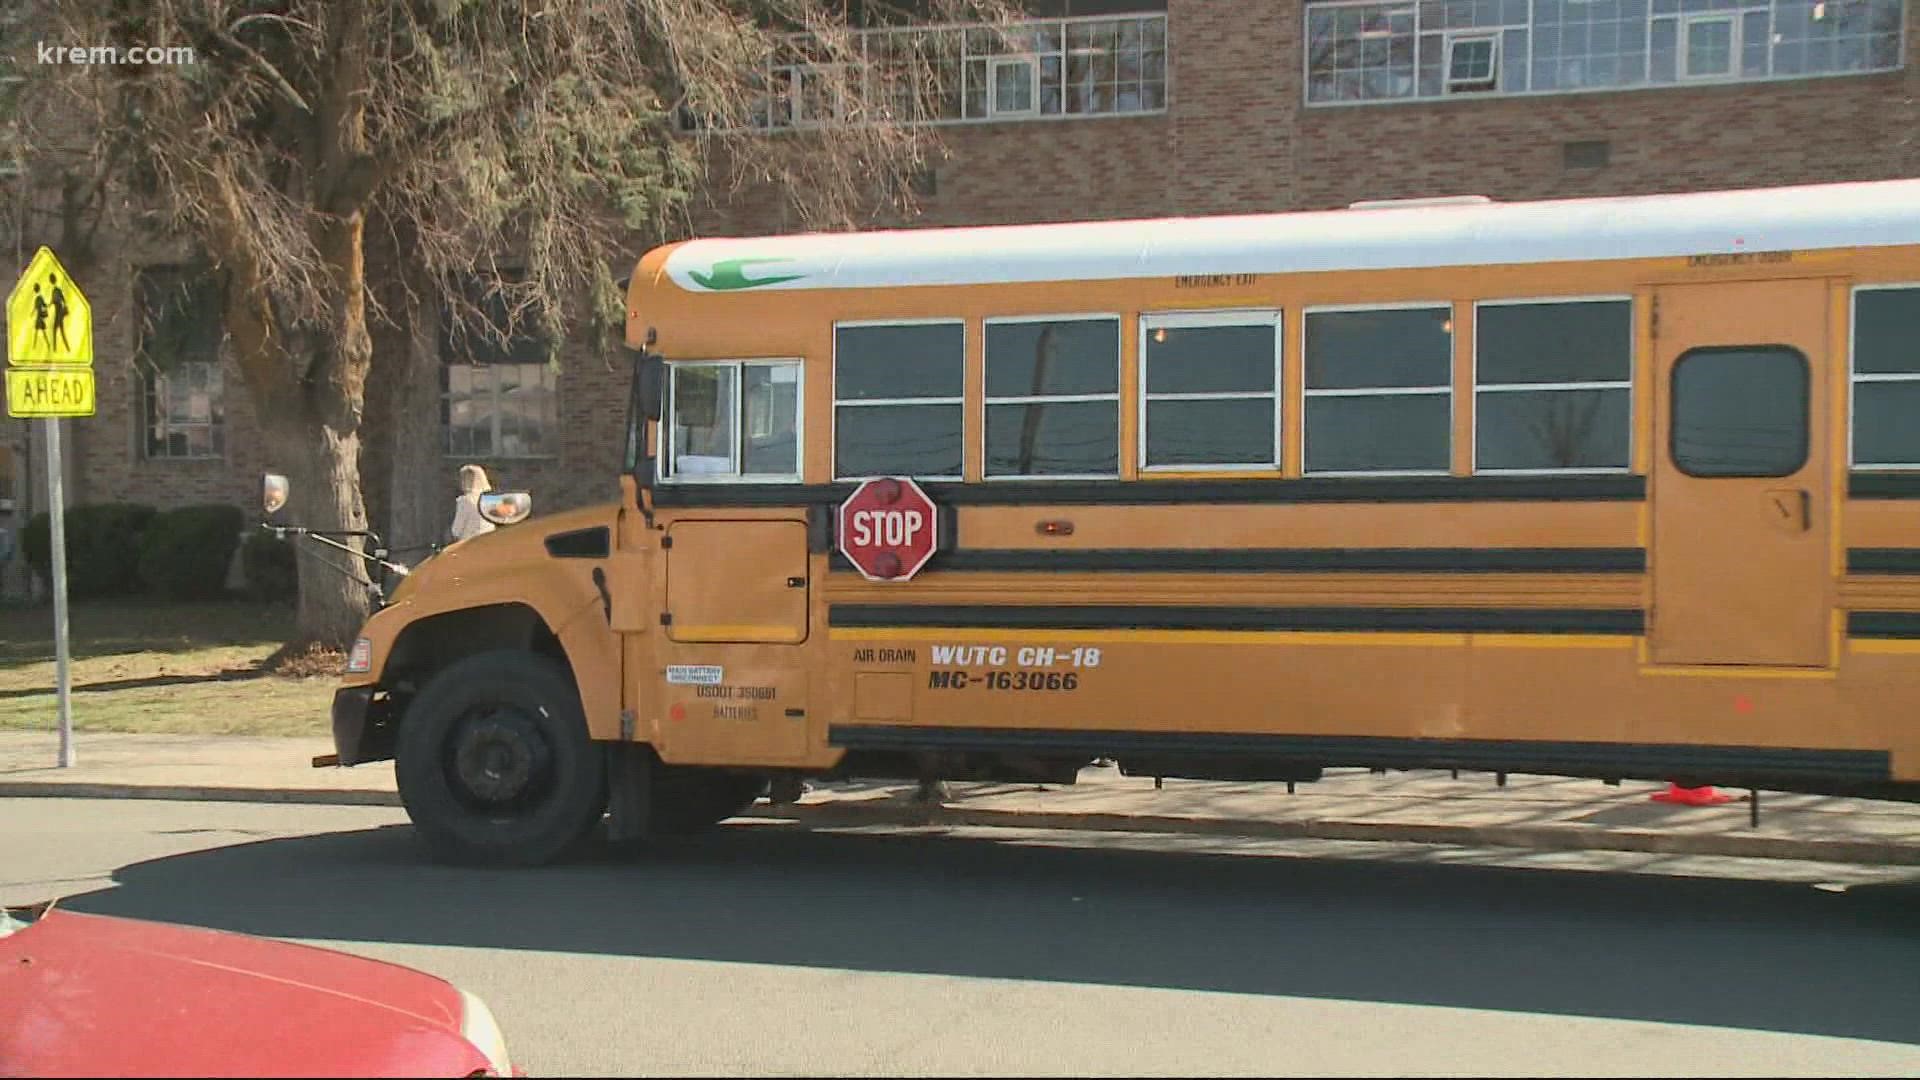 35% of students in the district take the bus each school day. Some have been arriving more than an hour late.